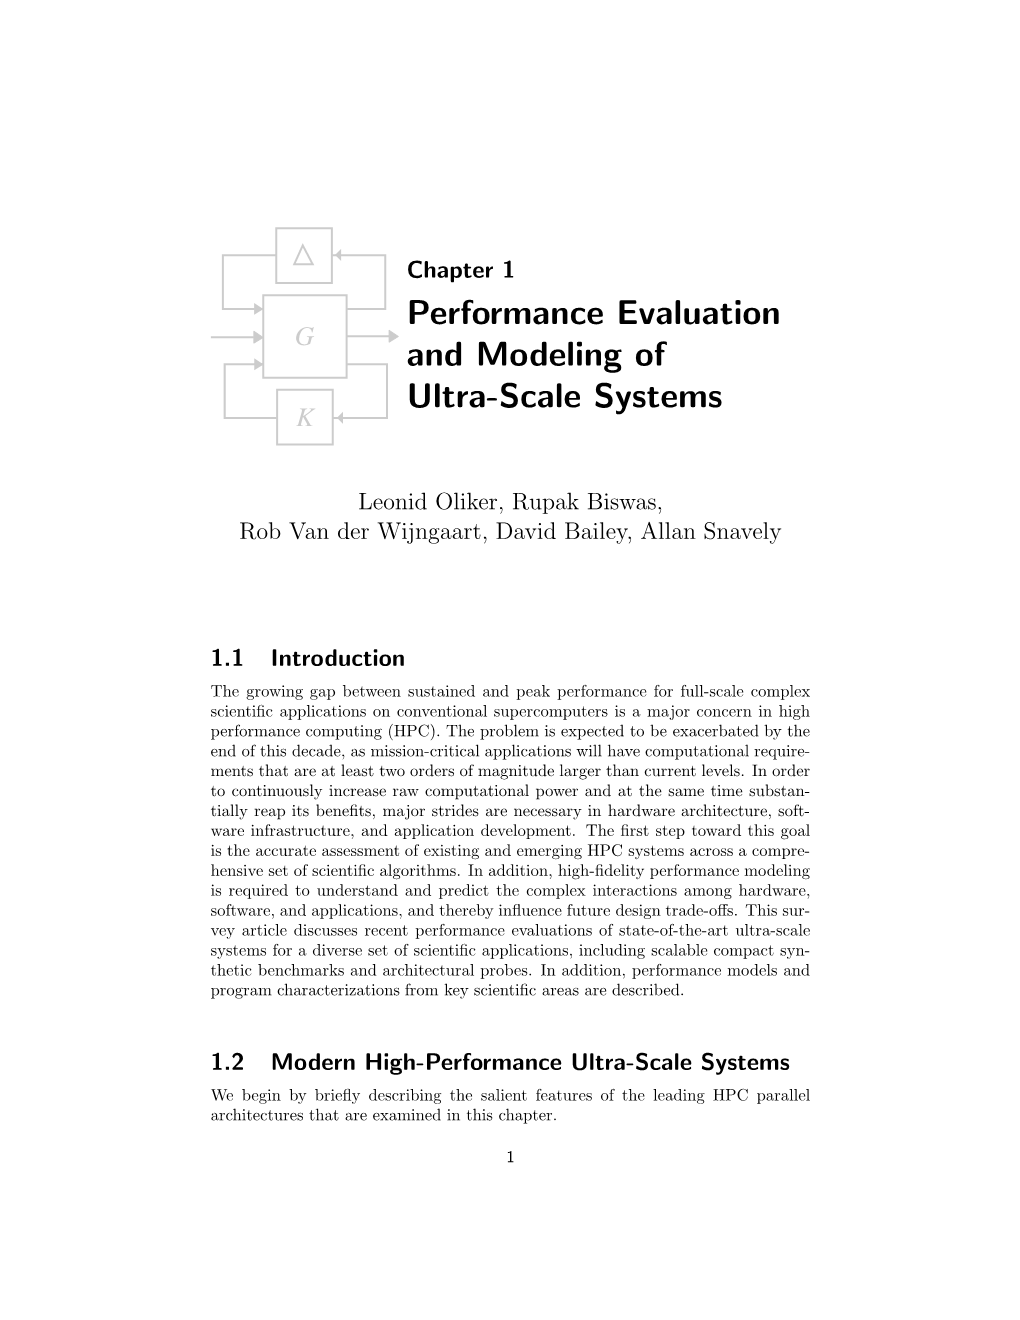 Performance Evaluation and Modeling of Ultra-Scale Systems